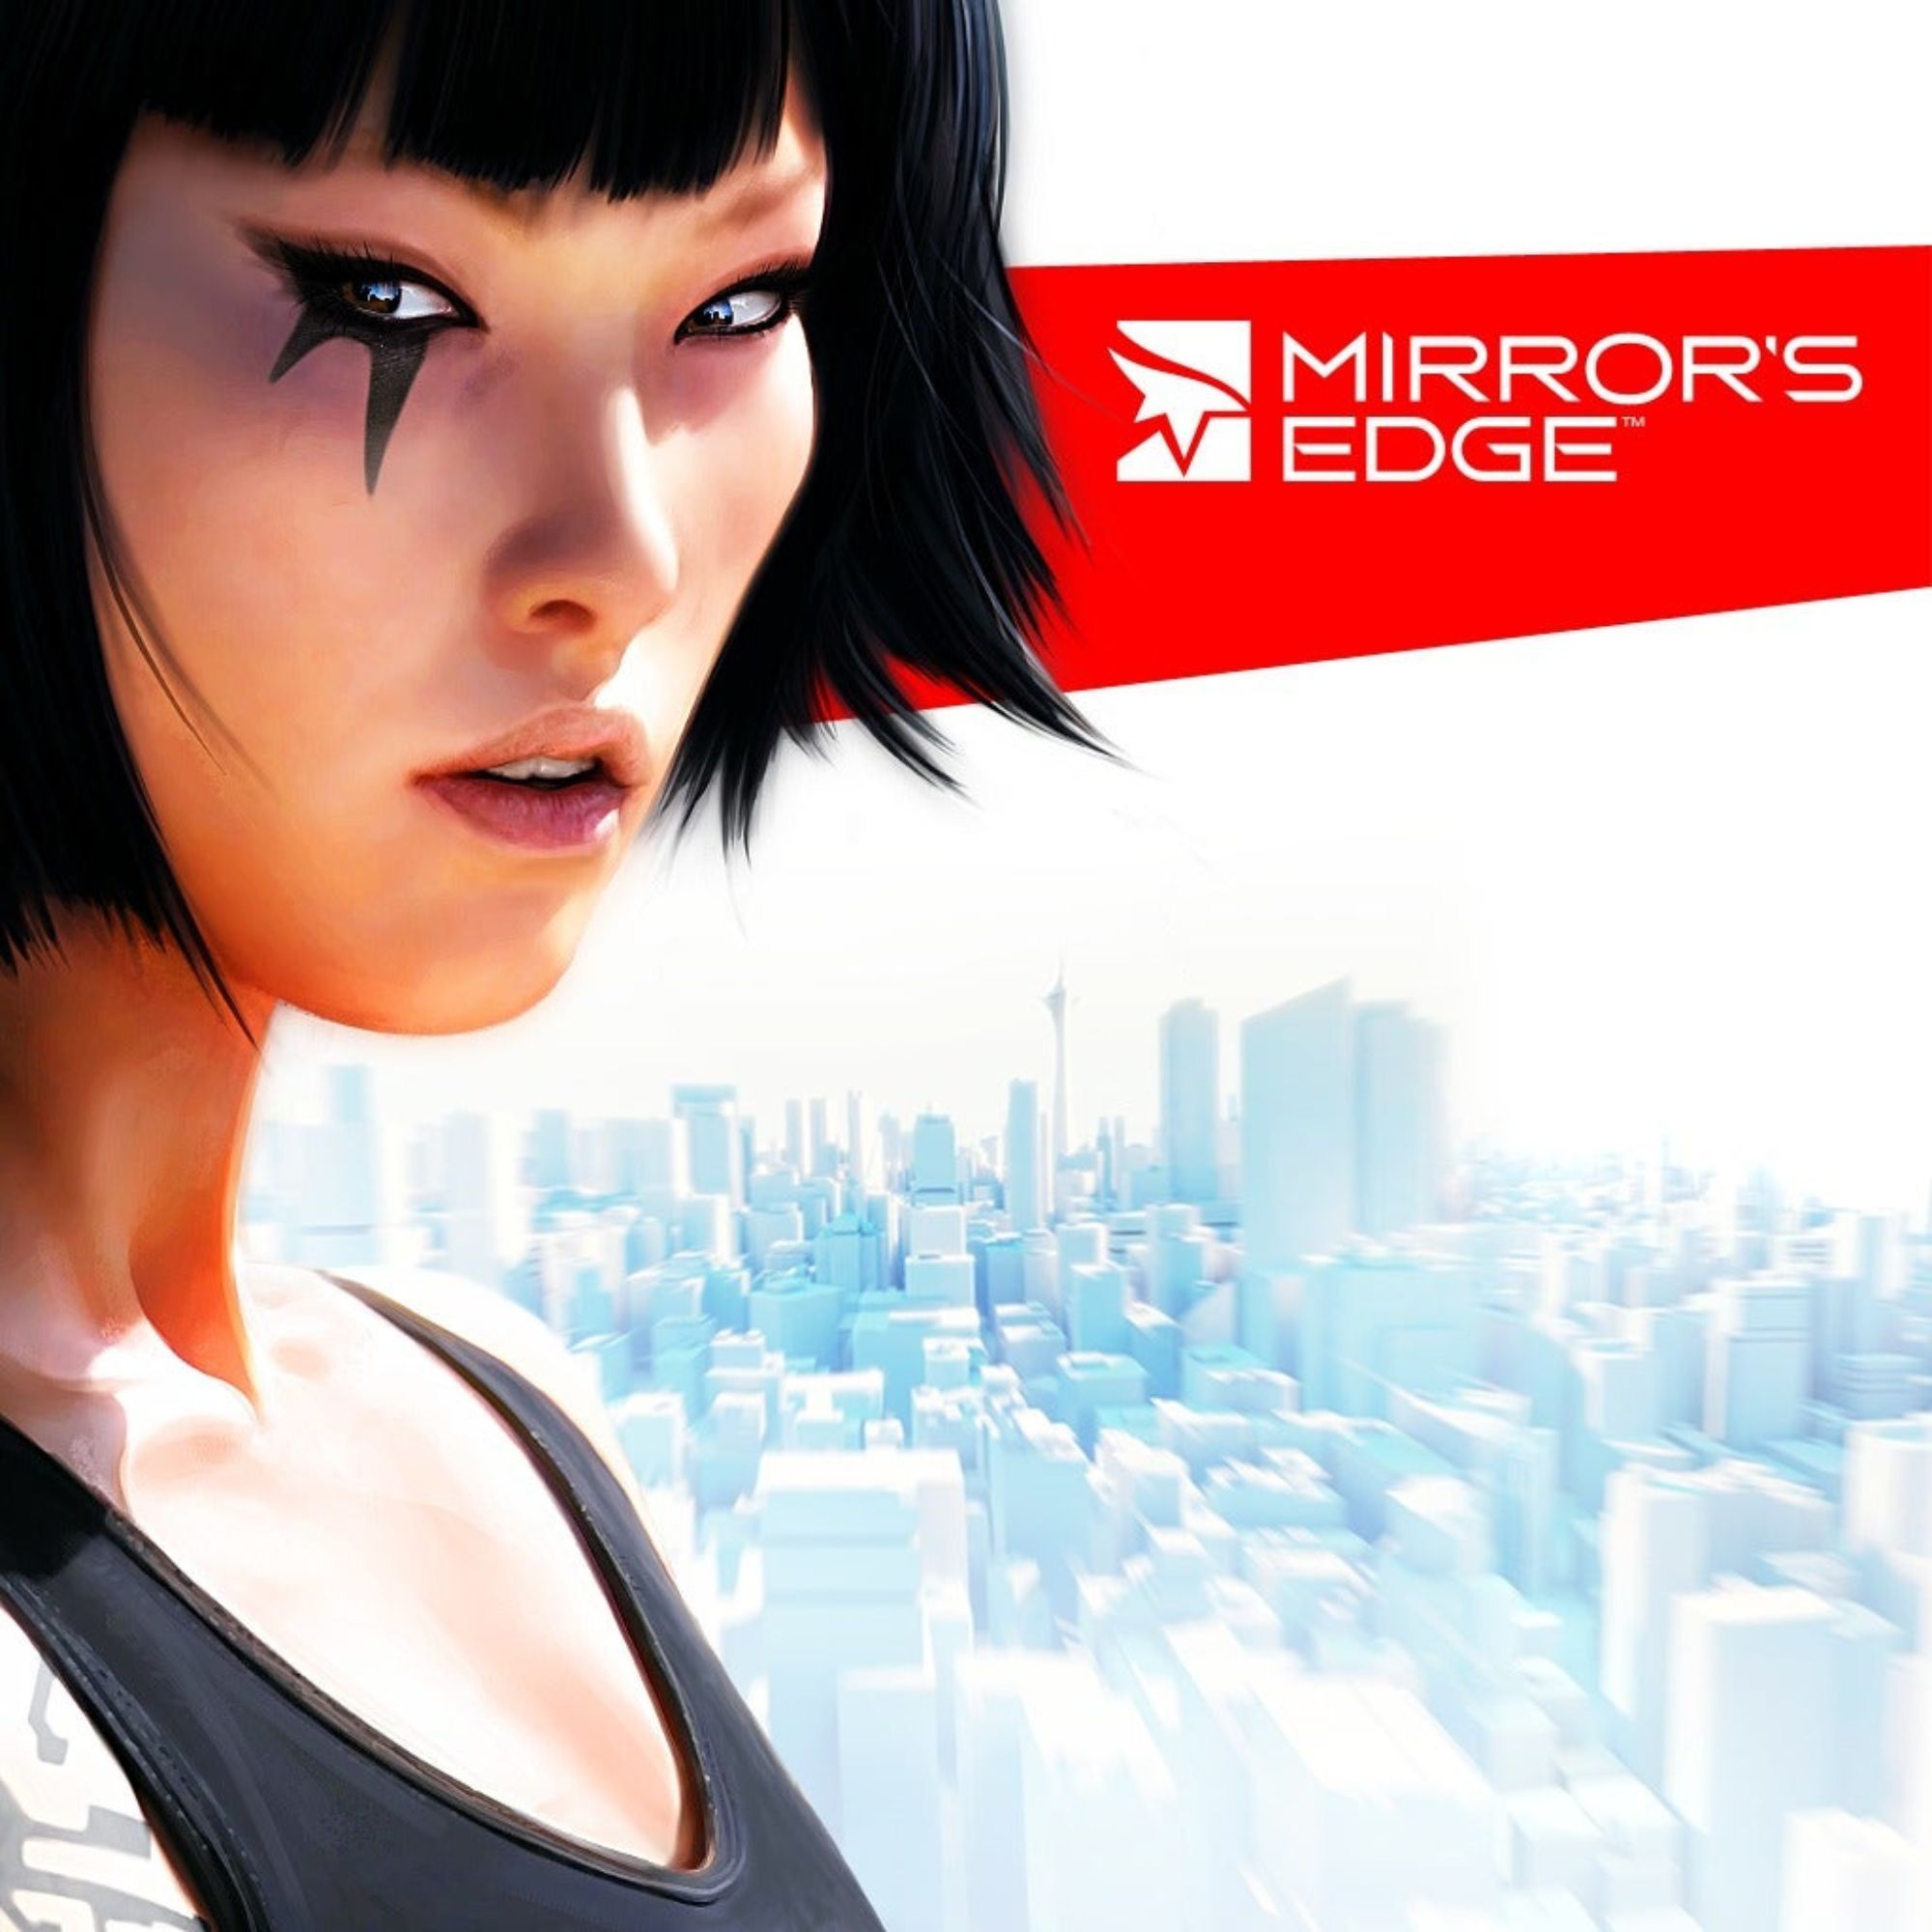 2000x2000 tag image for Mirror's Edge. A woman with an eye tattoo stands in front of a washed out city.